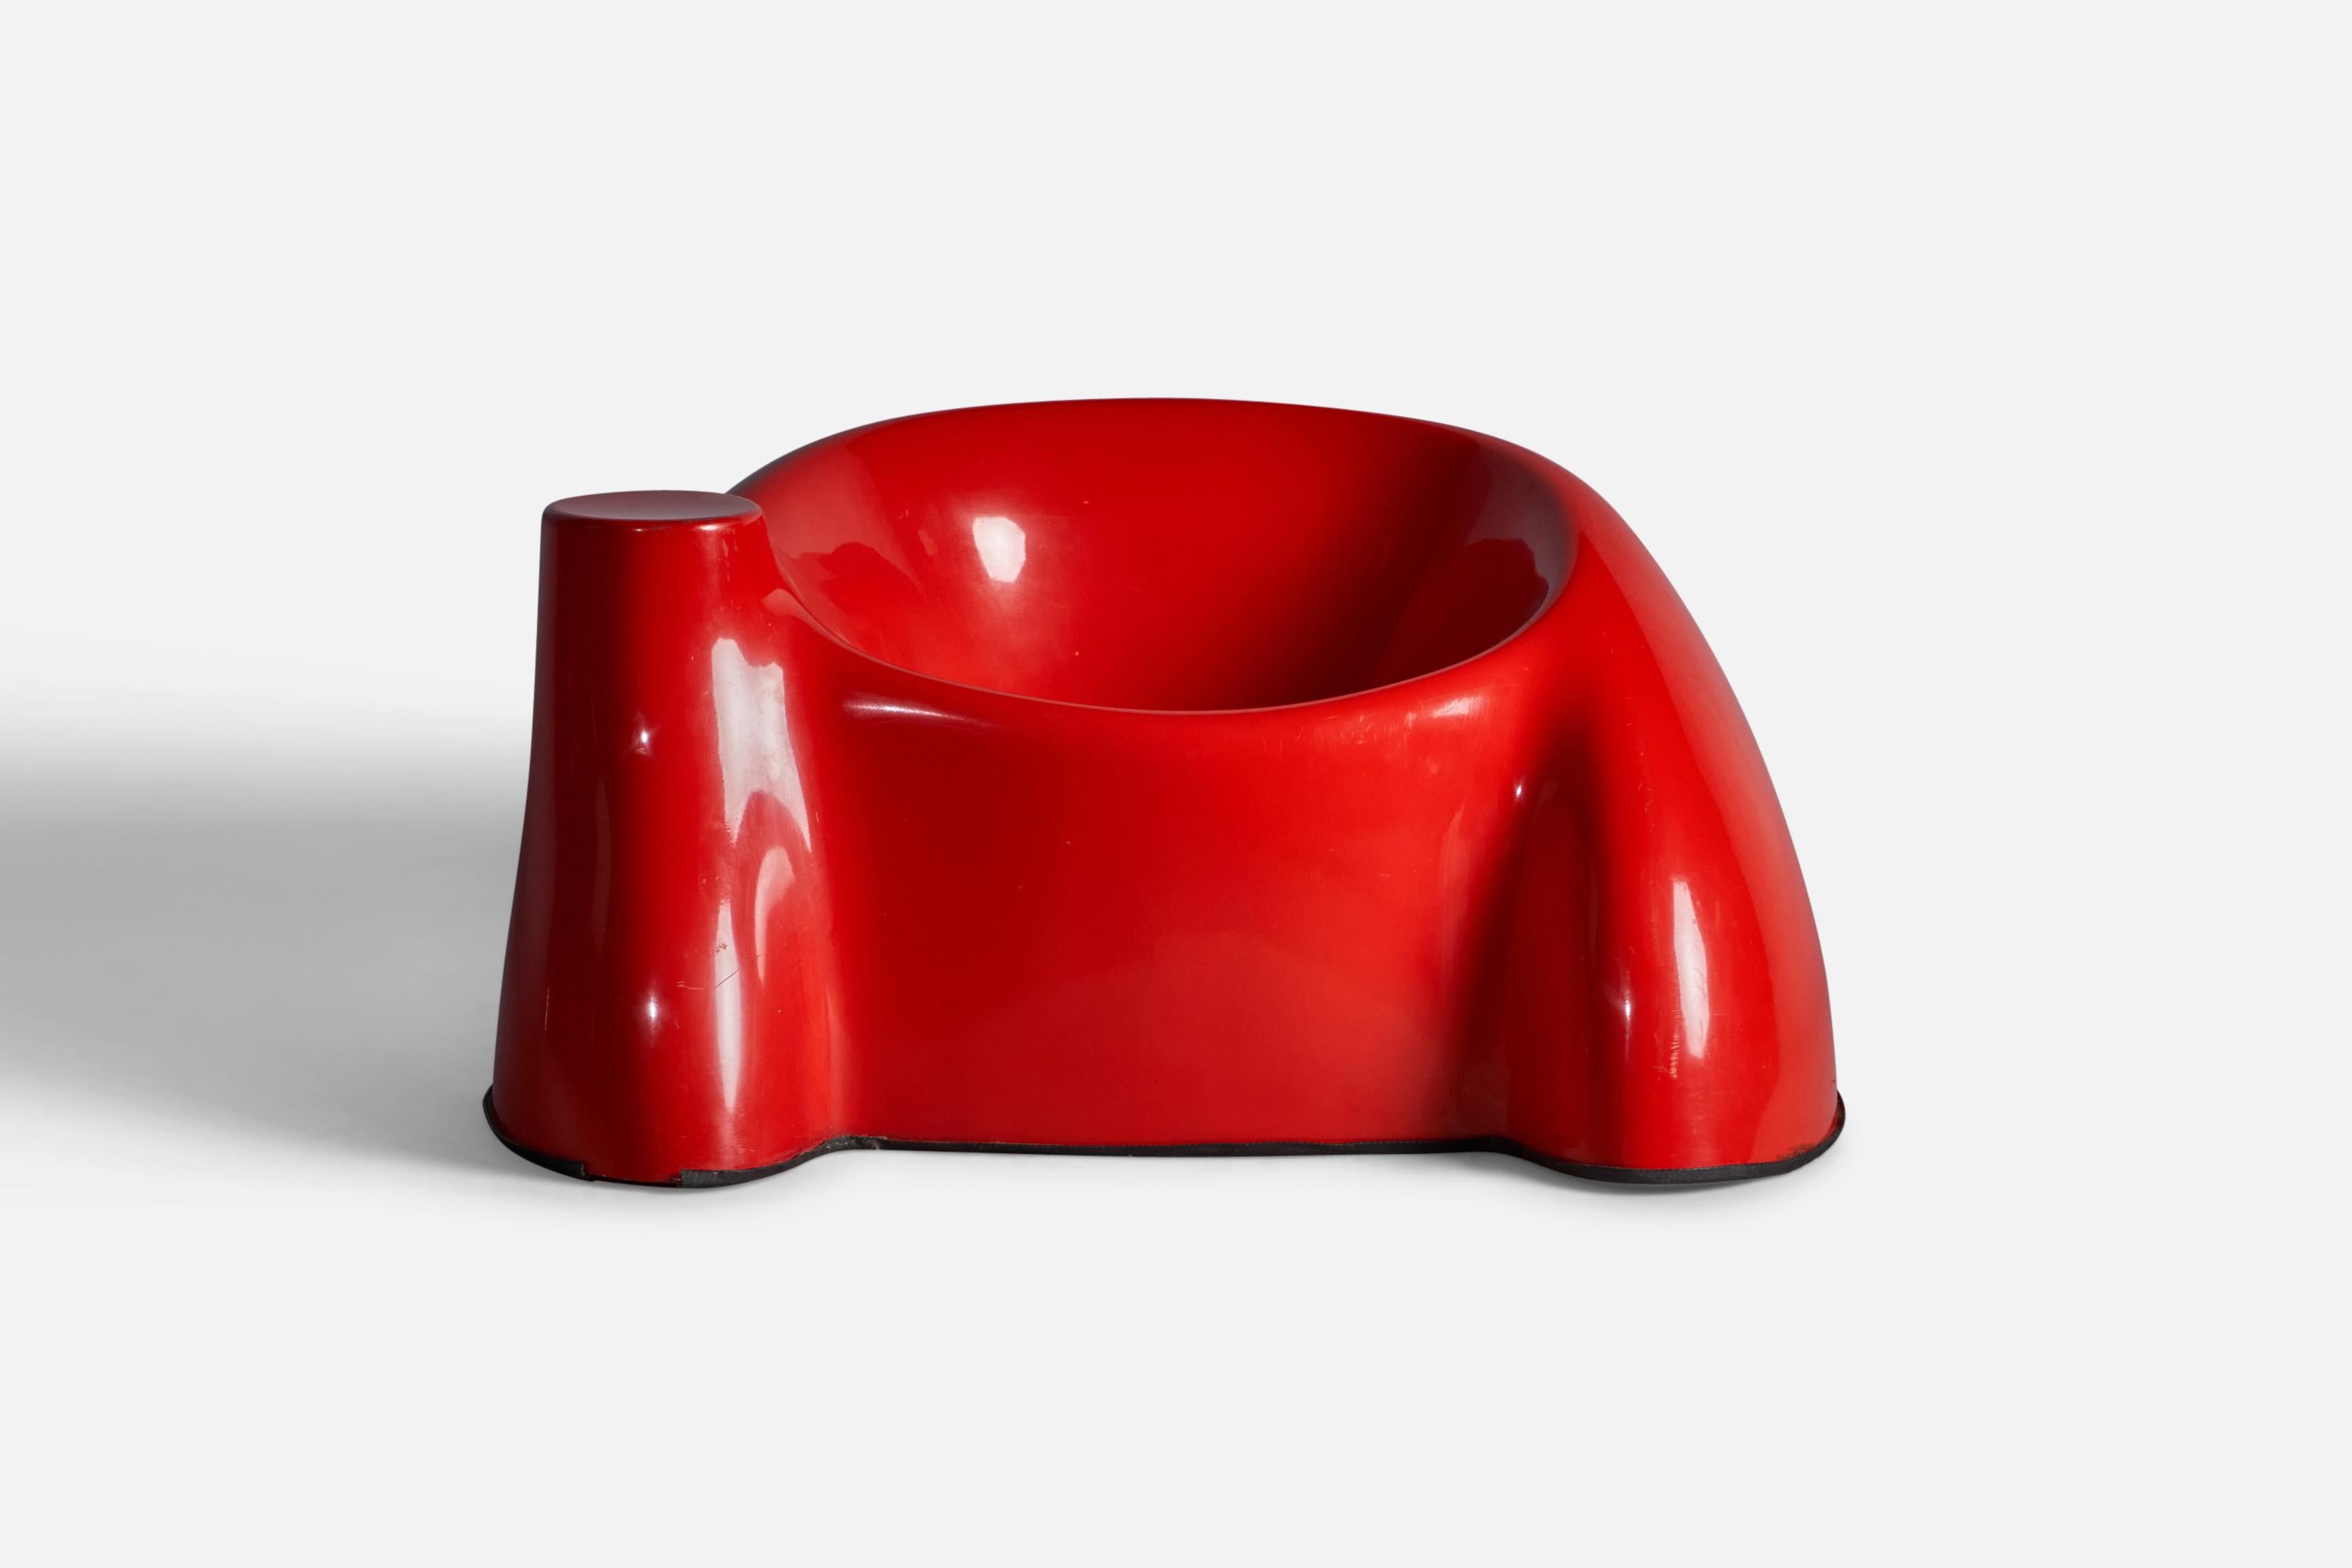 A red-lacquered fiberglass lounge chair, designed and produced by Wendell Castle, USA, 1970s.

14.75